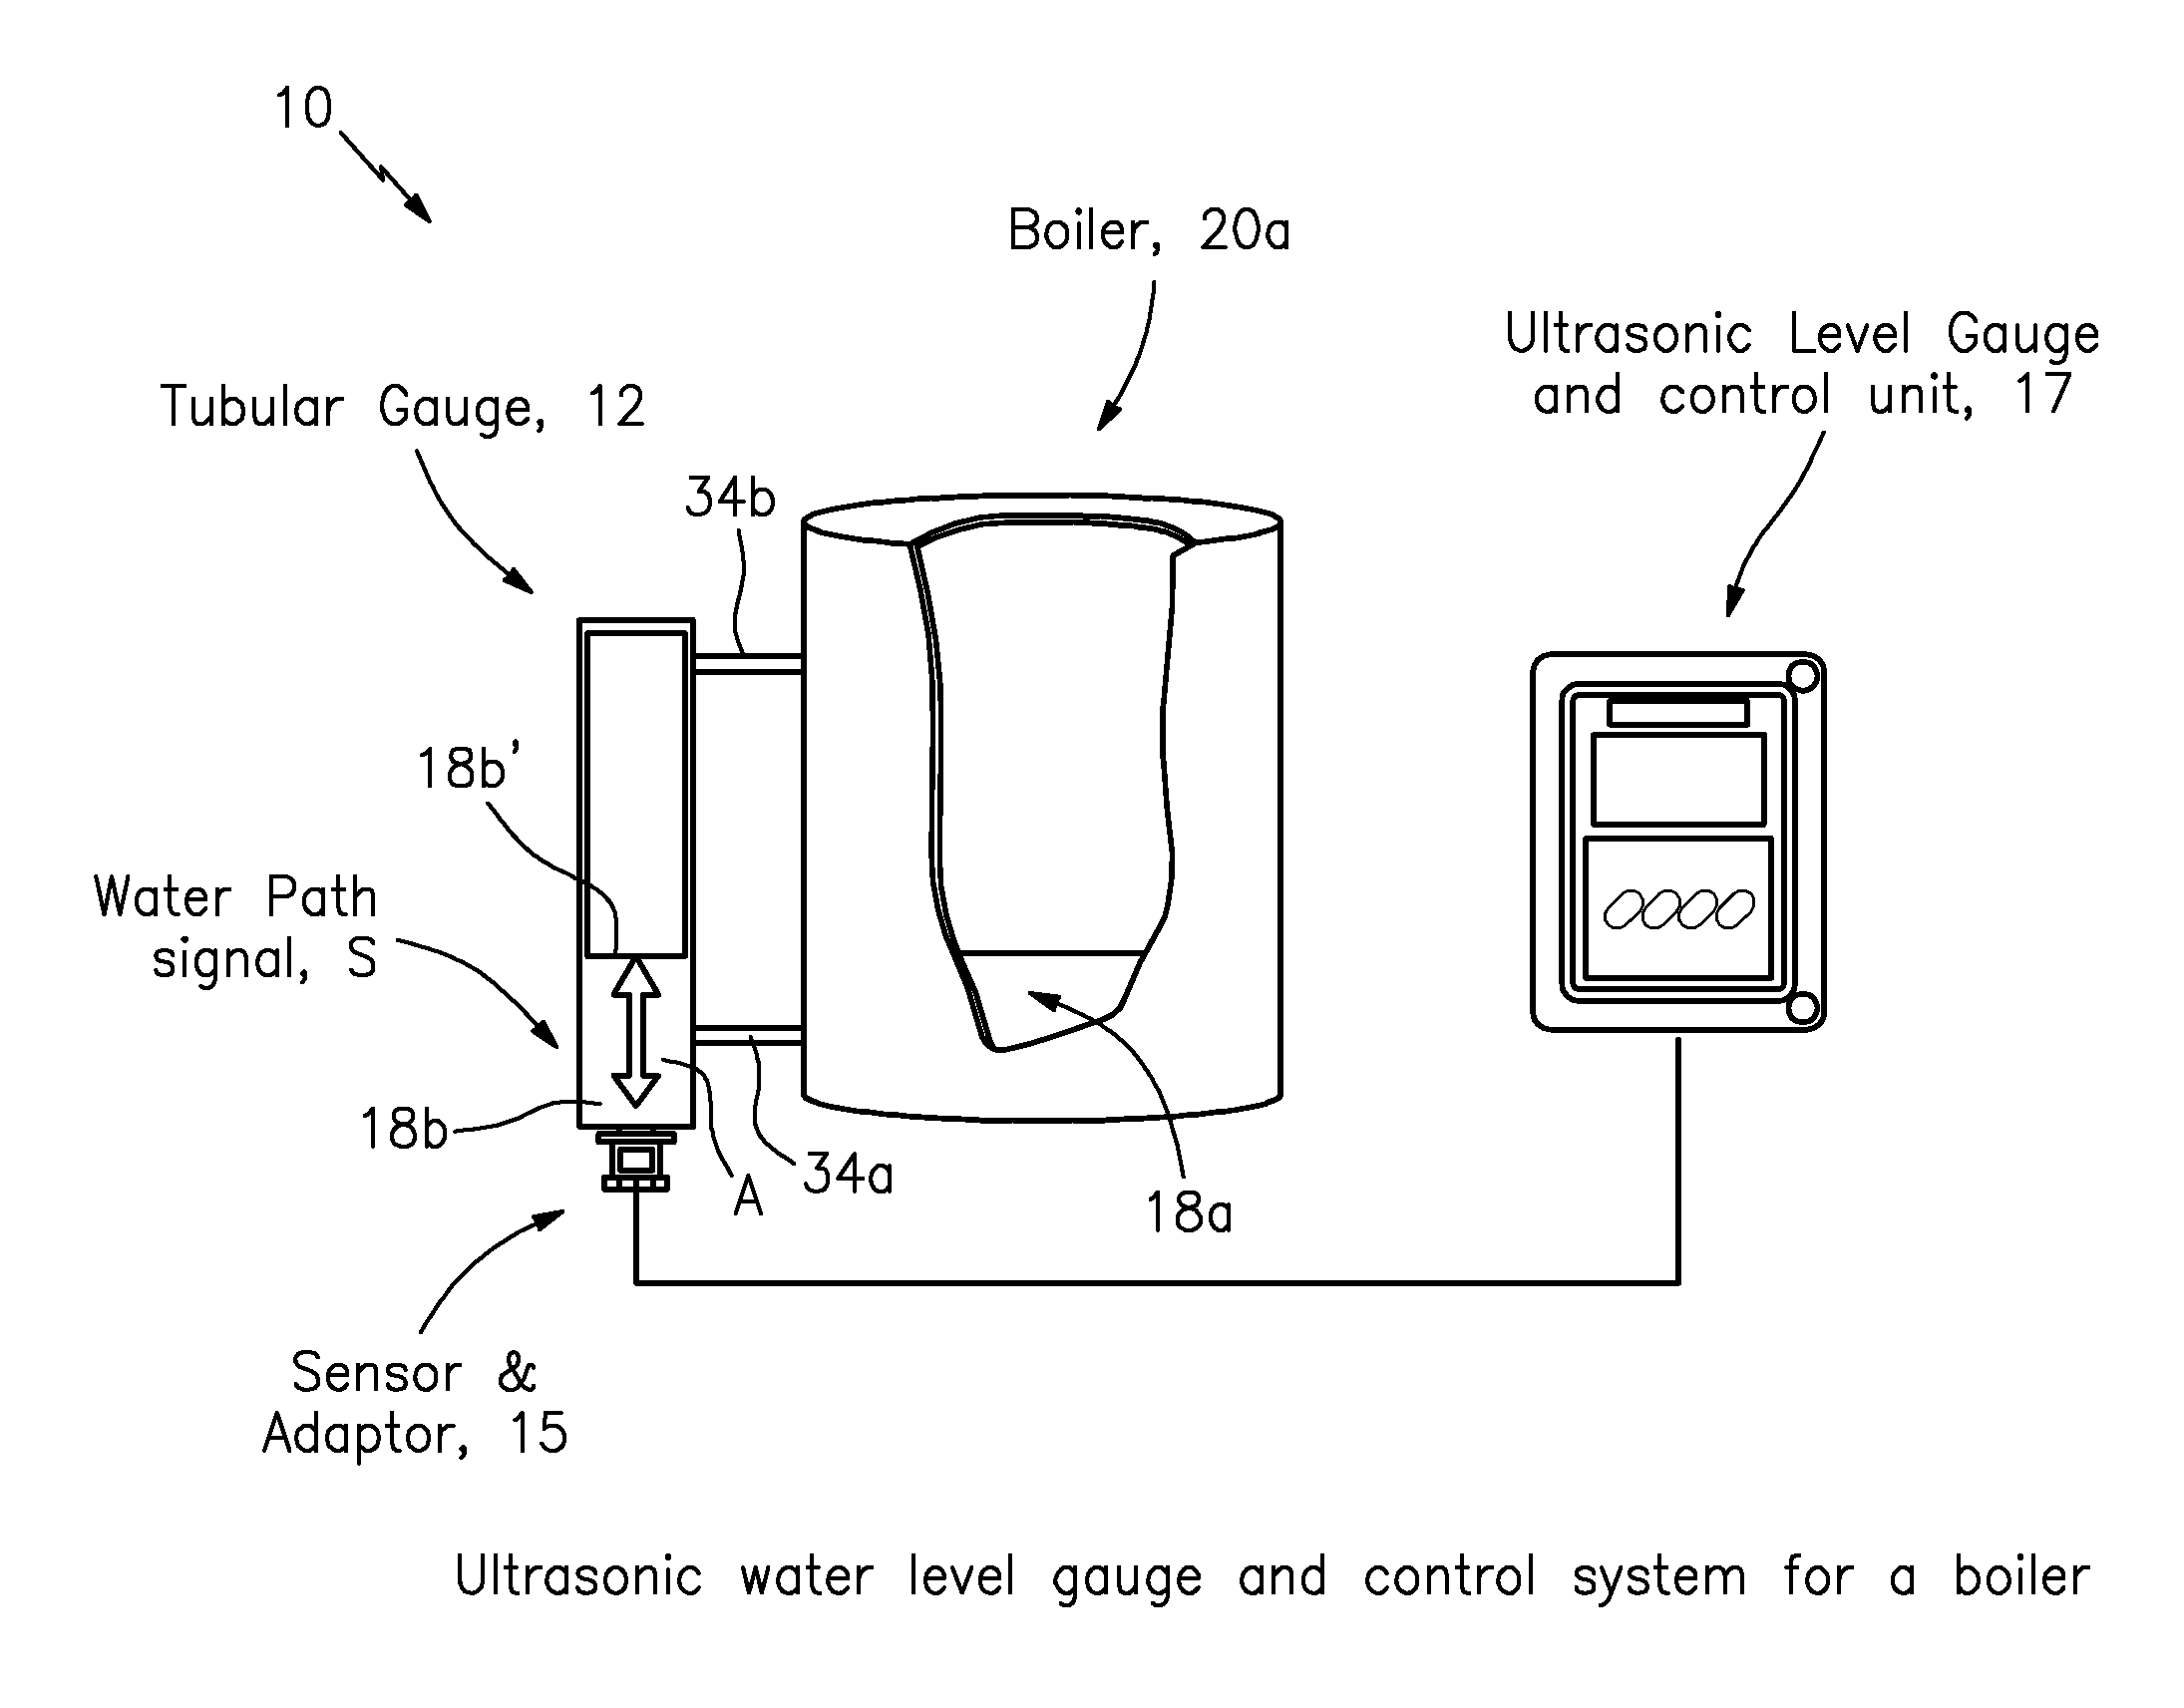 Ultrasonic water level gauge and control device